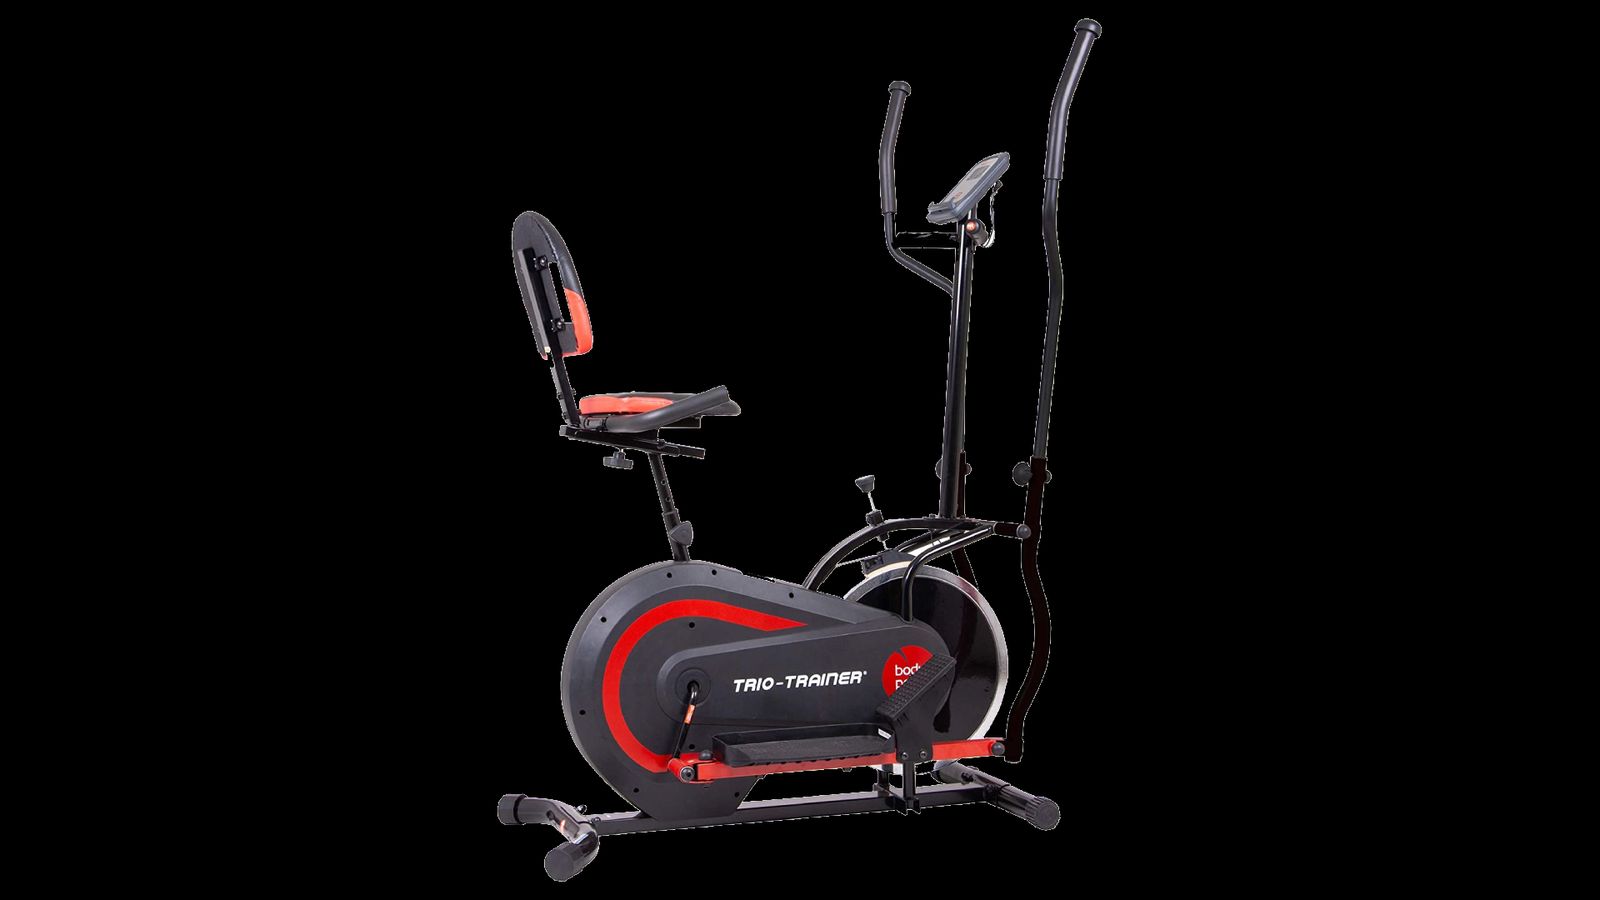 Body Power Trio Trainer product image of a black and red machine with a seat.